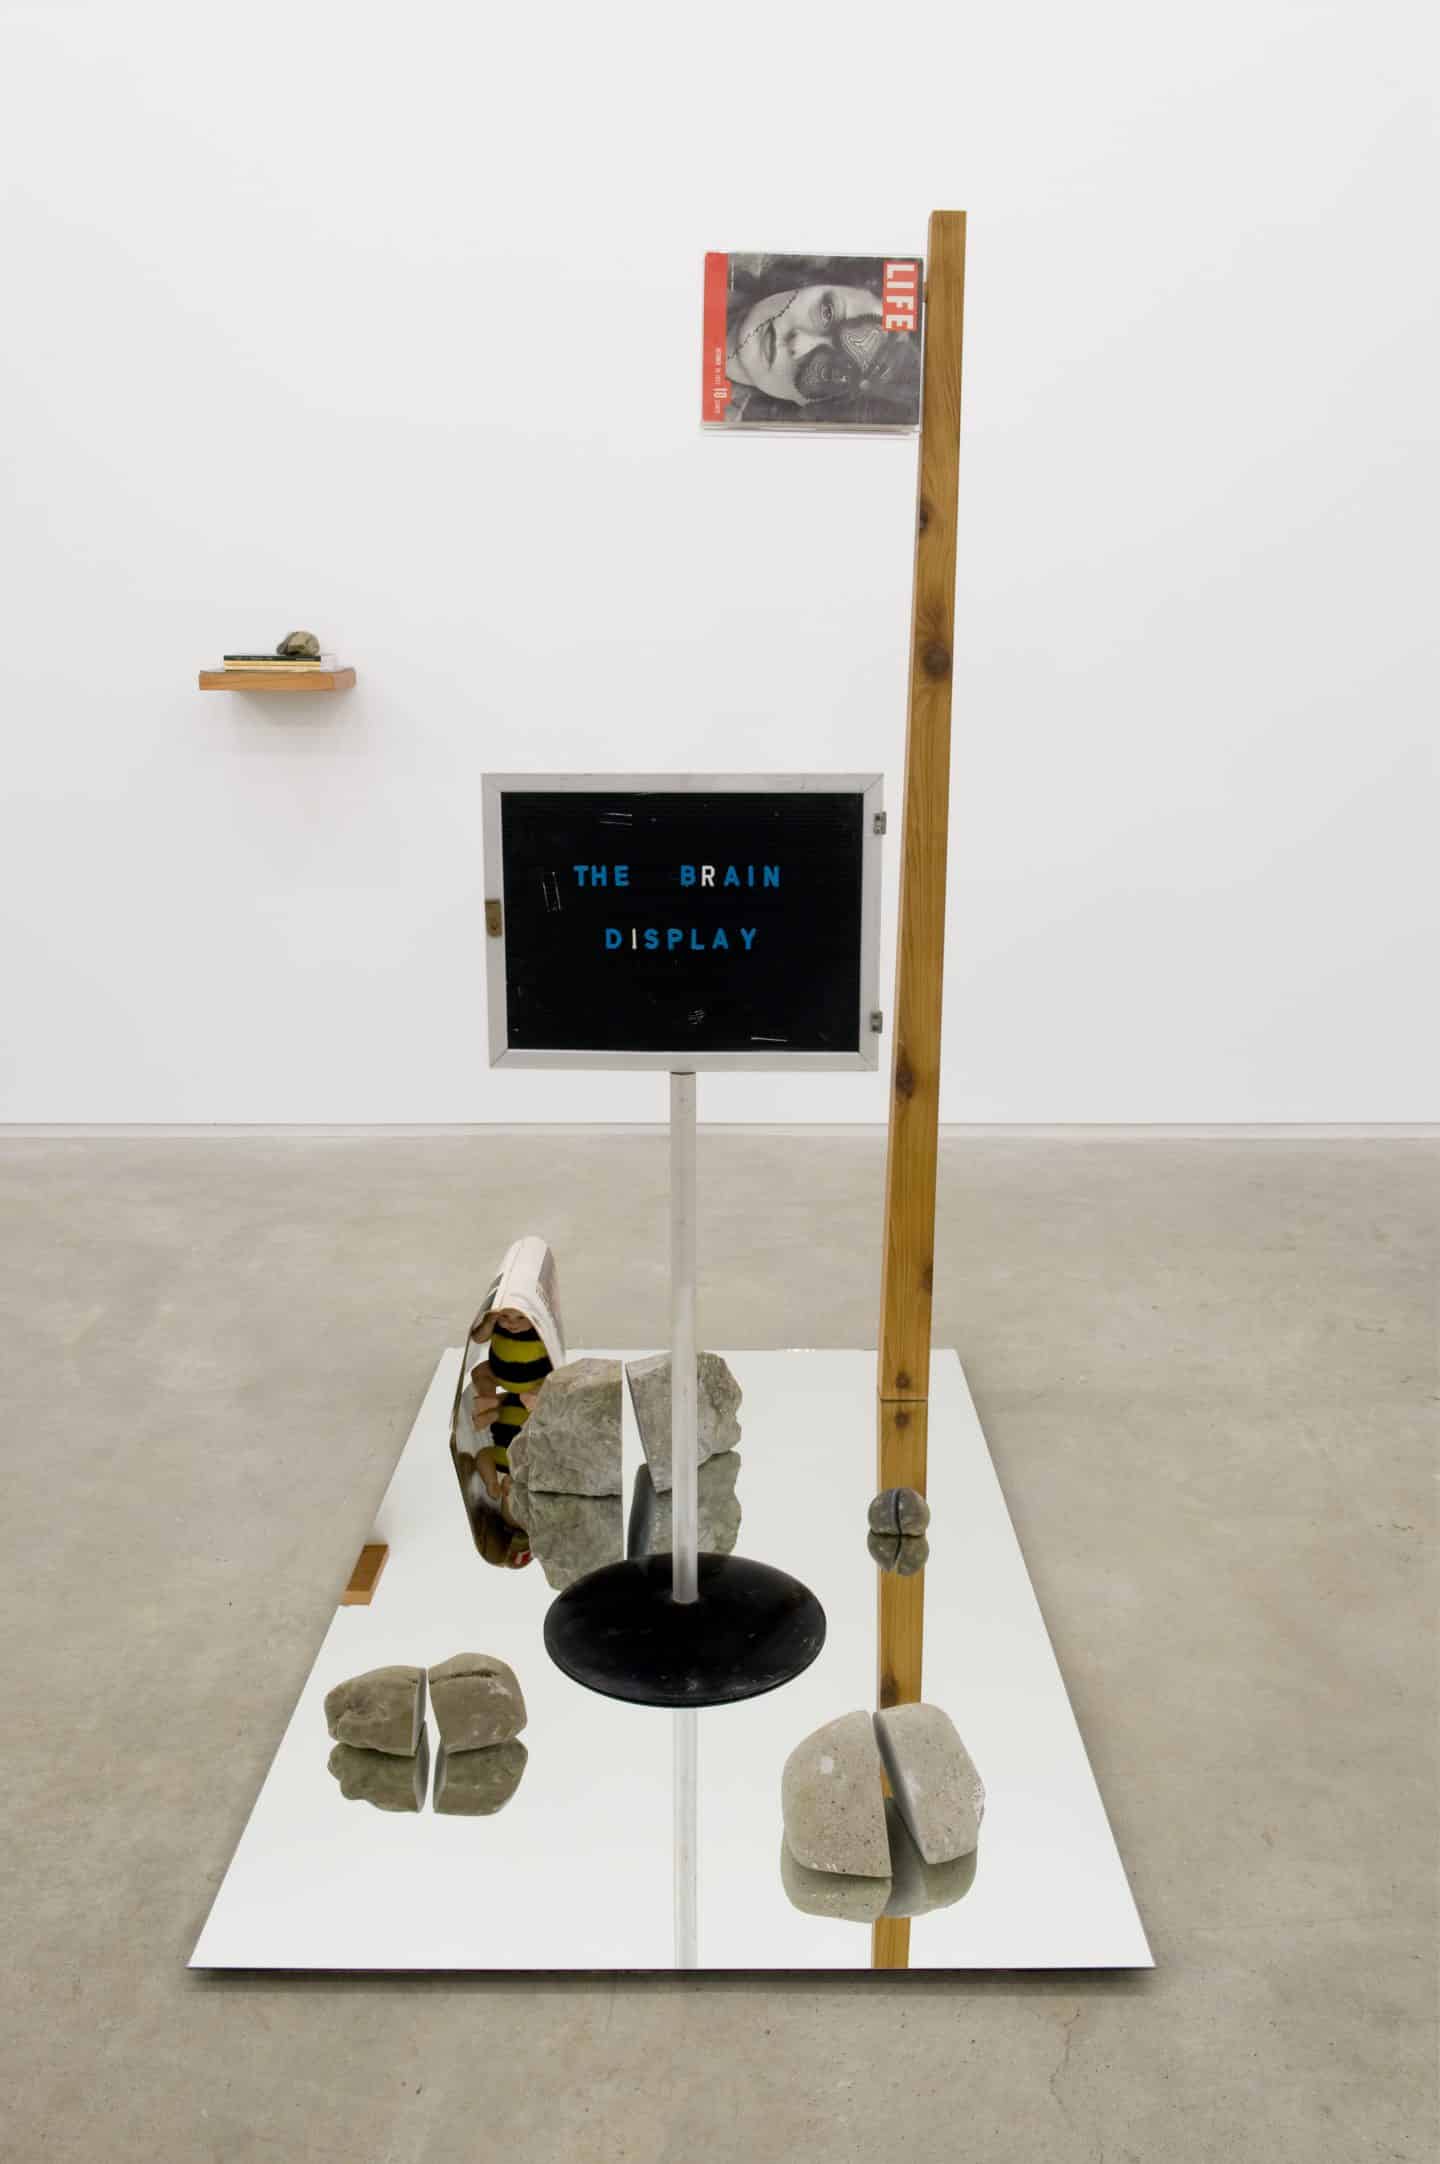 Judy Radul, The Brain Display, 2010, mirror, wood, 5 stones, plastic book holder, Life magazine, doll and YouTube video. Purchase, Canada Council Acquisition Assistance and the Donald Murray Shepherd Fund, 2013 (56-007)